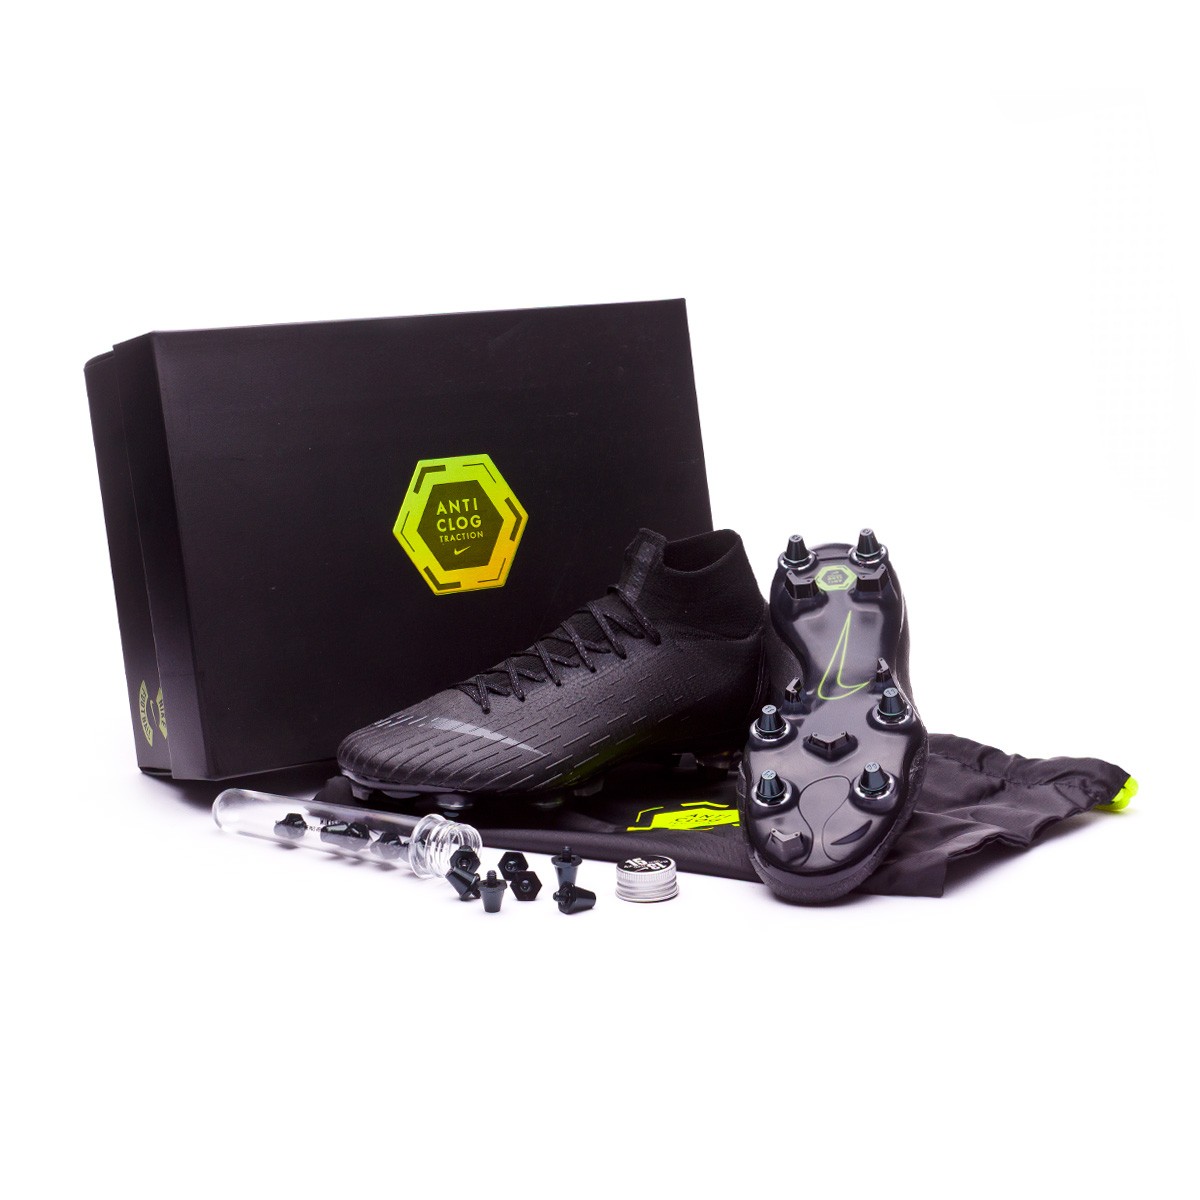 Football Boots Nike Mercurial Superfly 